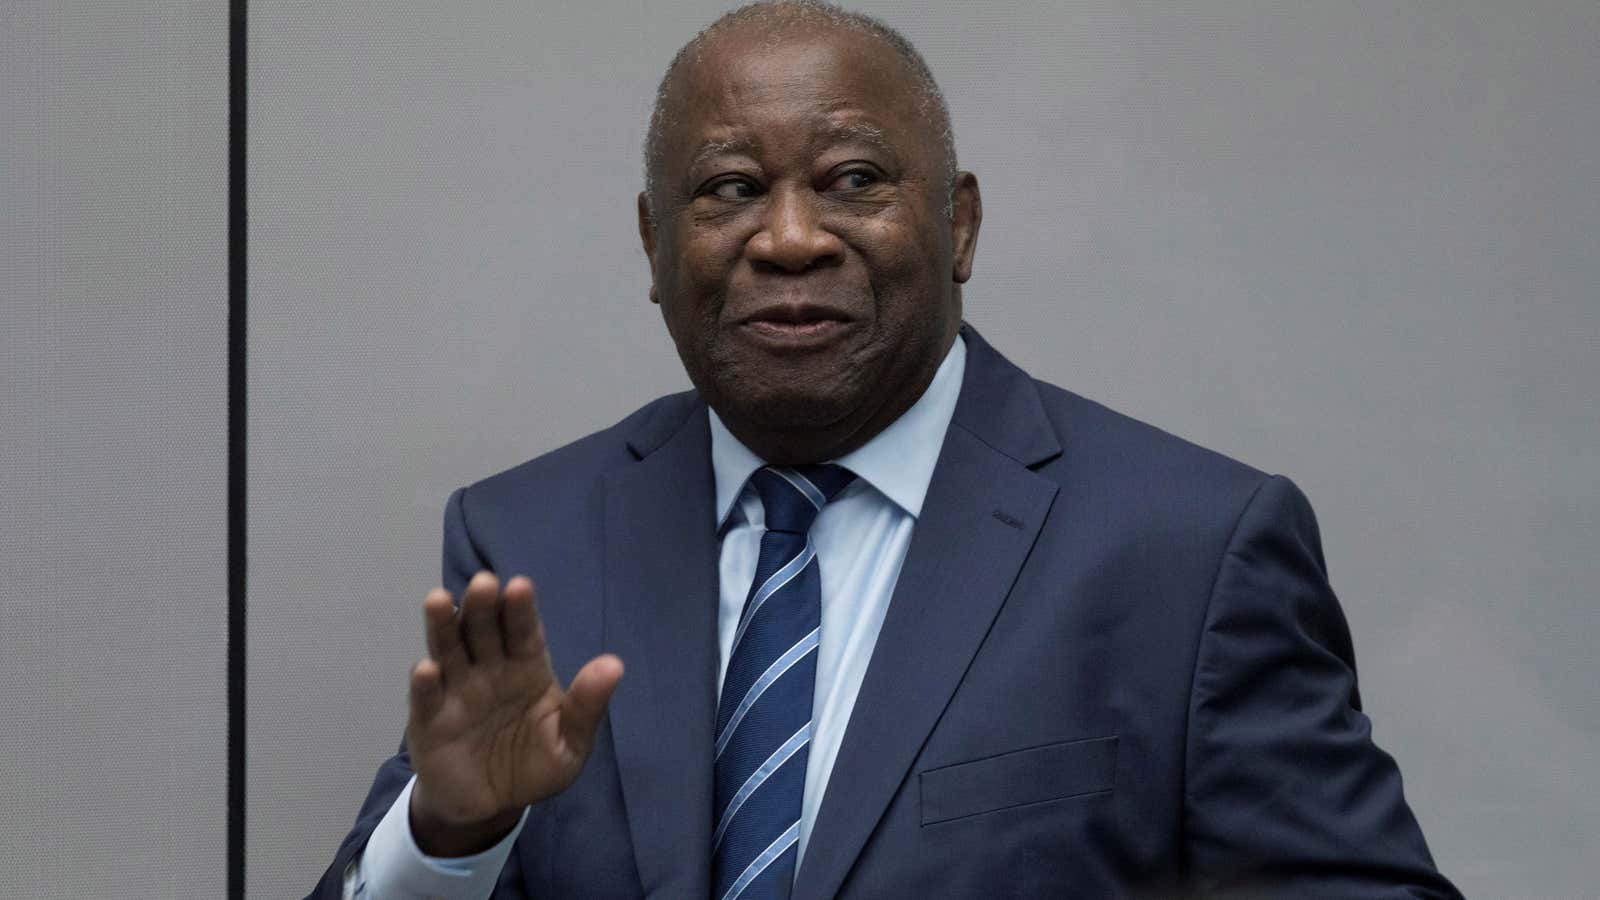 Phew!
Former Ivory Coast President Laurent Gbagbo at International Criminal Court in The Hague, Netherlands